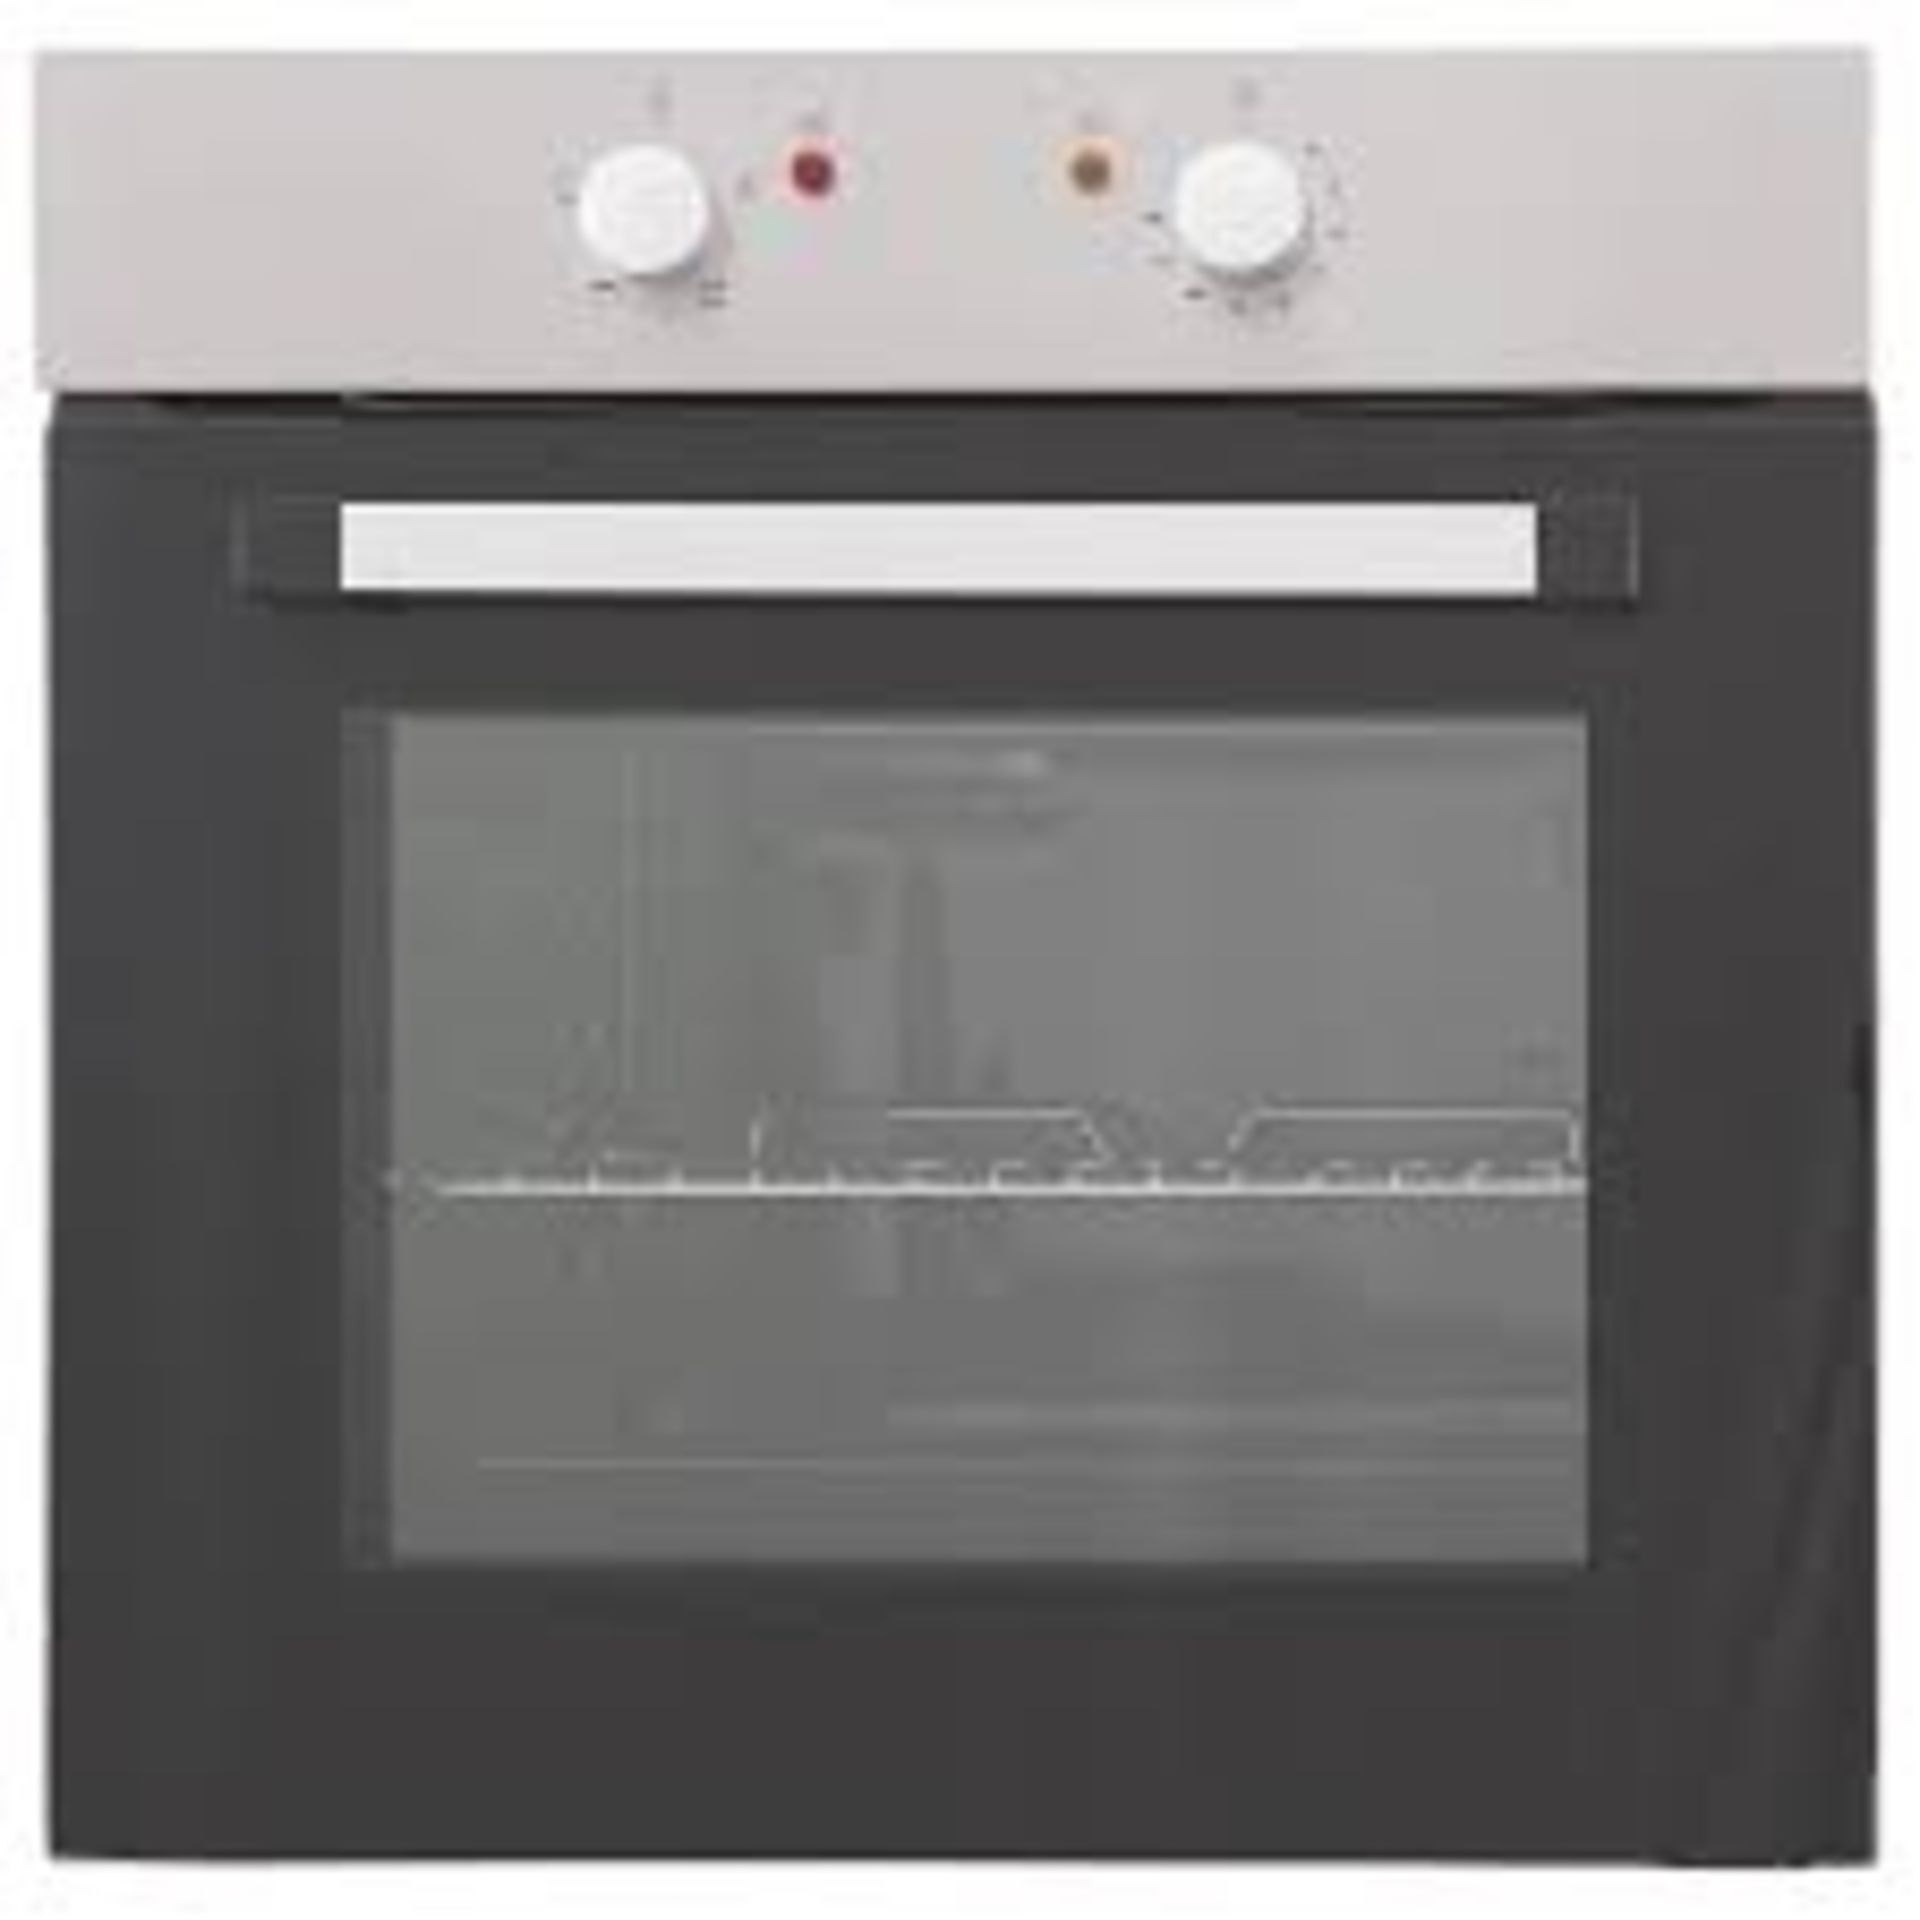 Cooke & Lewis Built- In Single Electric Oven Stainless Steel. - ER48